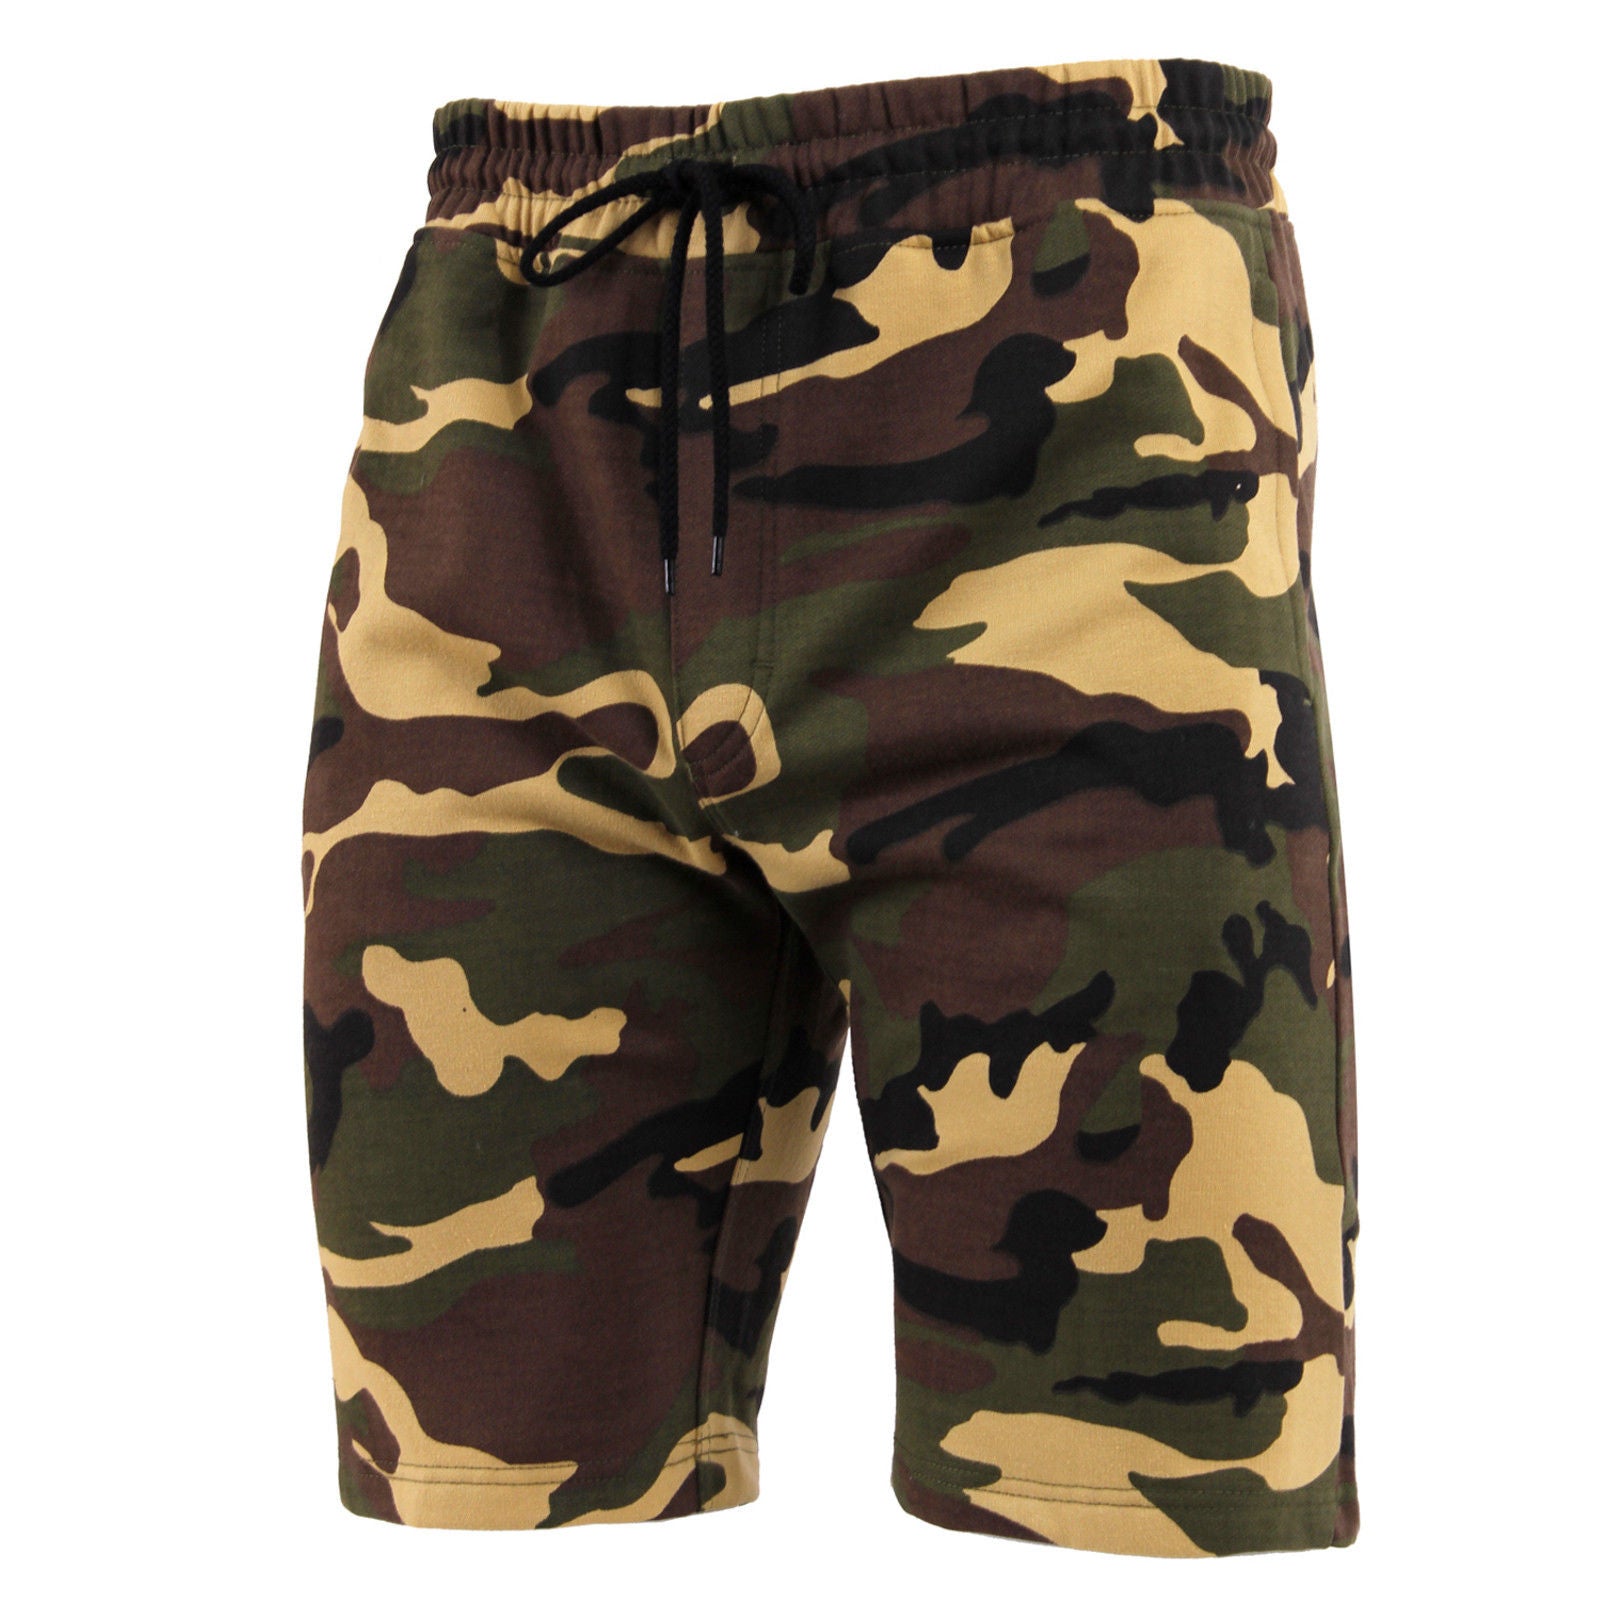 Rothco Men's Camouflage Sweat Shorts - Woodland, Purple or City Camo S ...